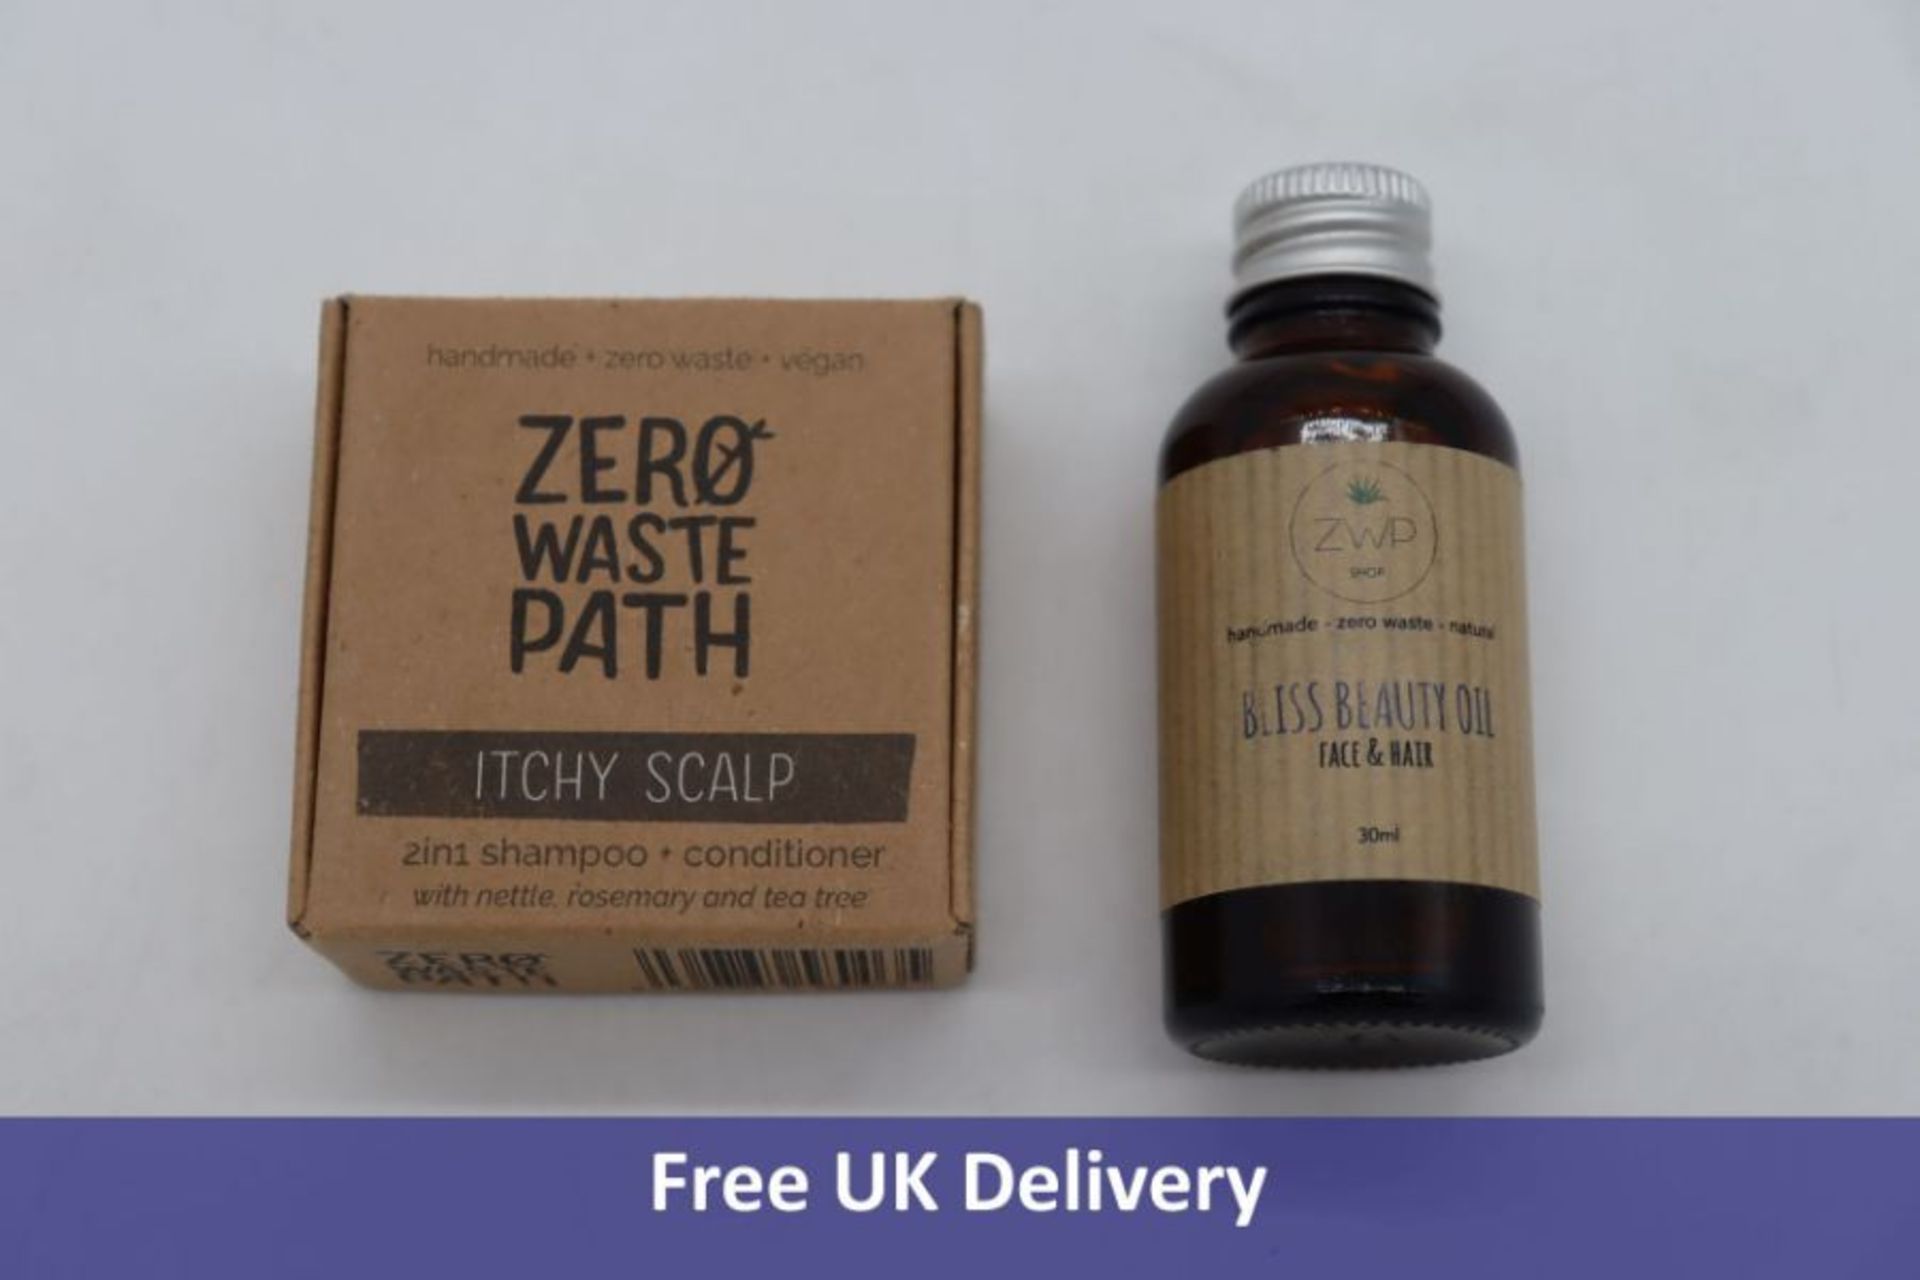 Zero Waste Path to include 42x Itchy Scalp Shampoo Bar and 16x Bliss Beauty Oil